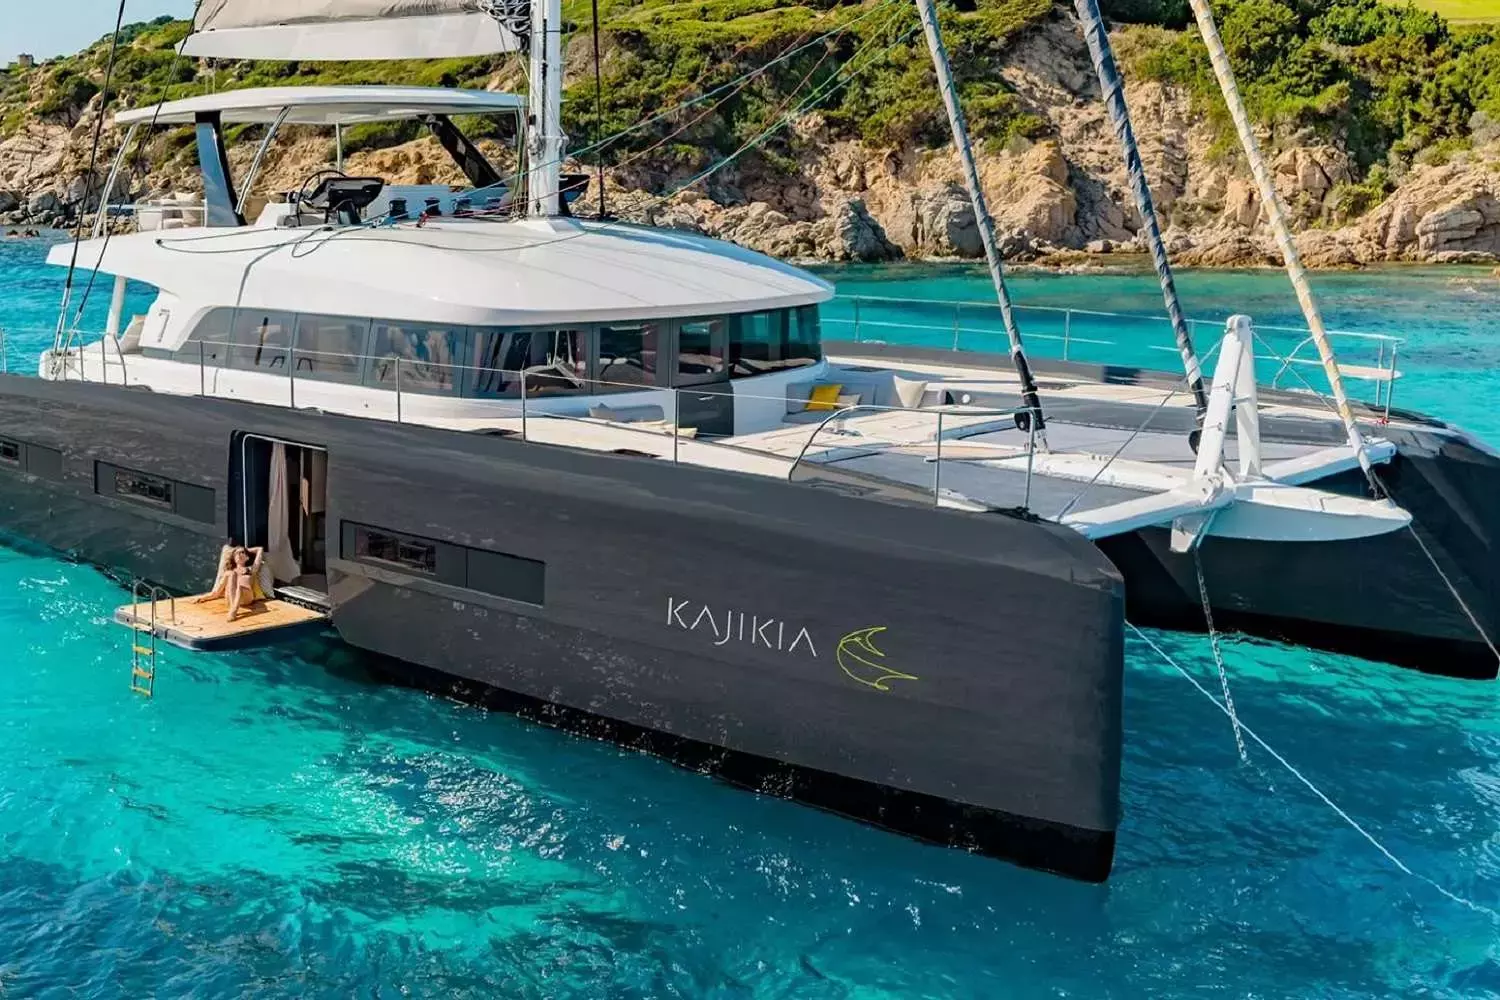 Kajikia by Lagoon - Top rates for a Rental of a private Luxury Catamaran in Italy